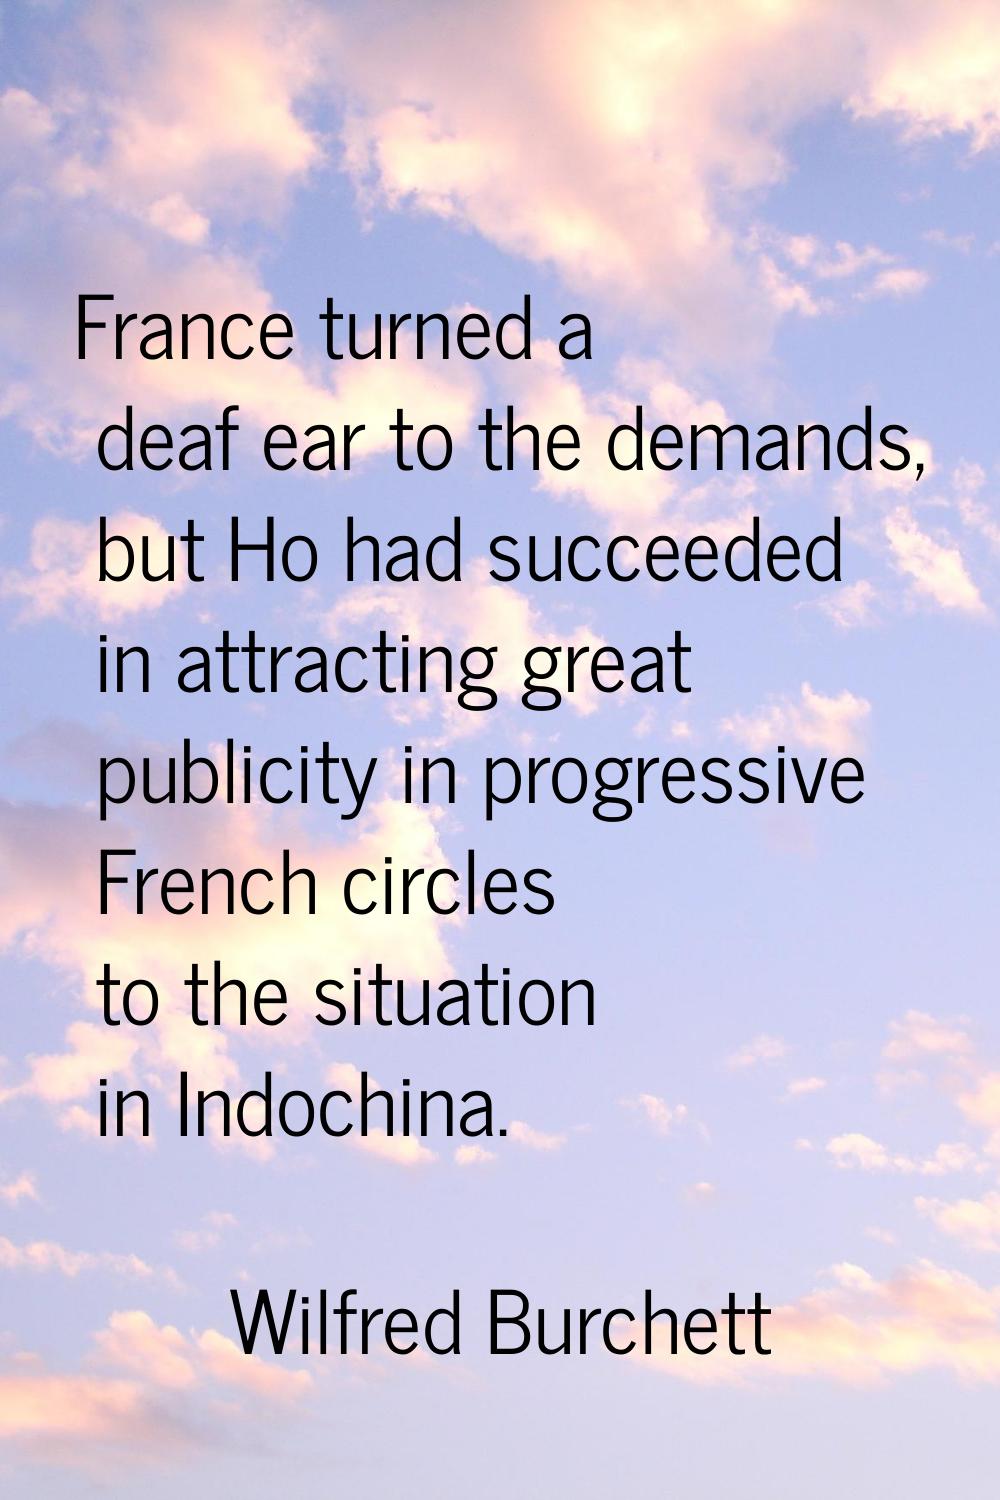 France turned a deaf ear to the demands, but Ho had succeeded in attracting great publicity in prog